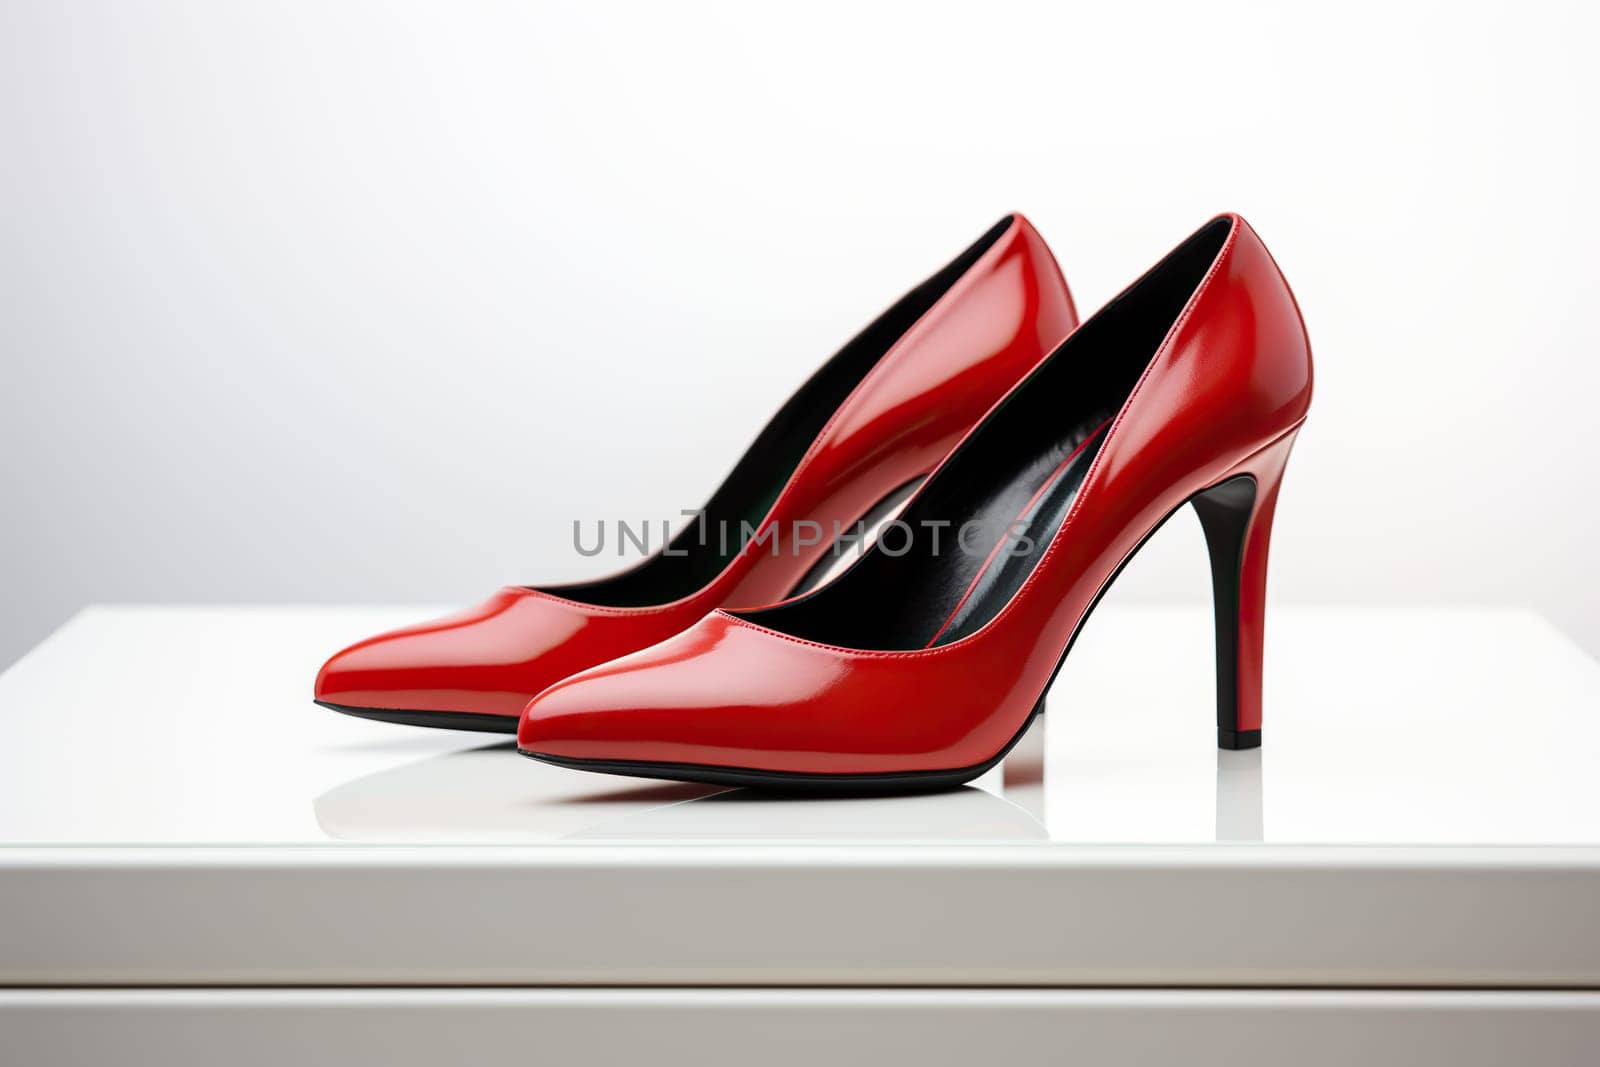 Beautiful elegant red women's high heel shoes standing on a white podium. Side view by Vovmar